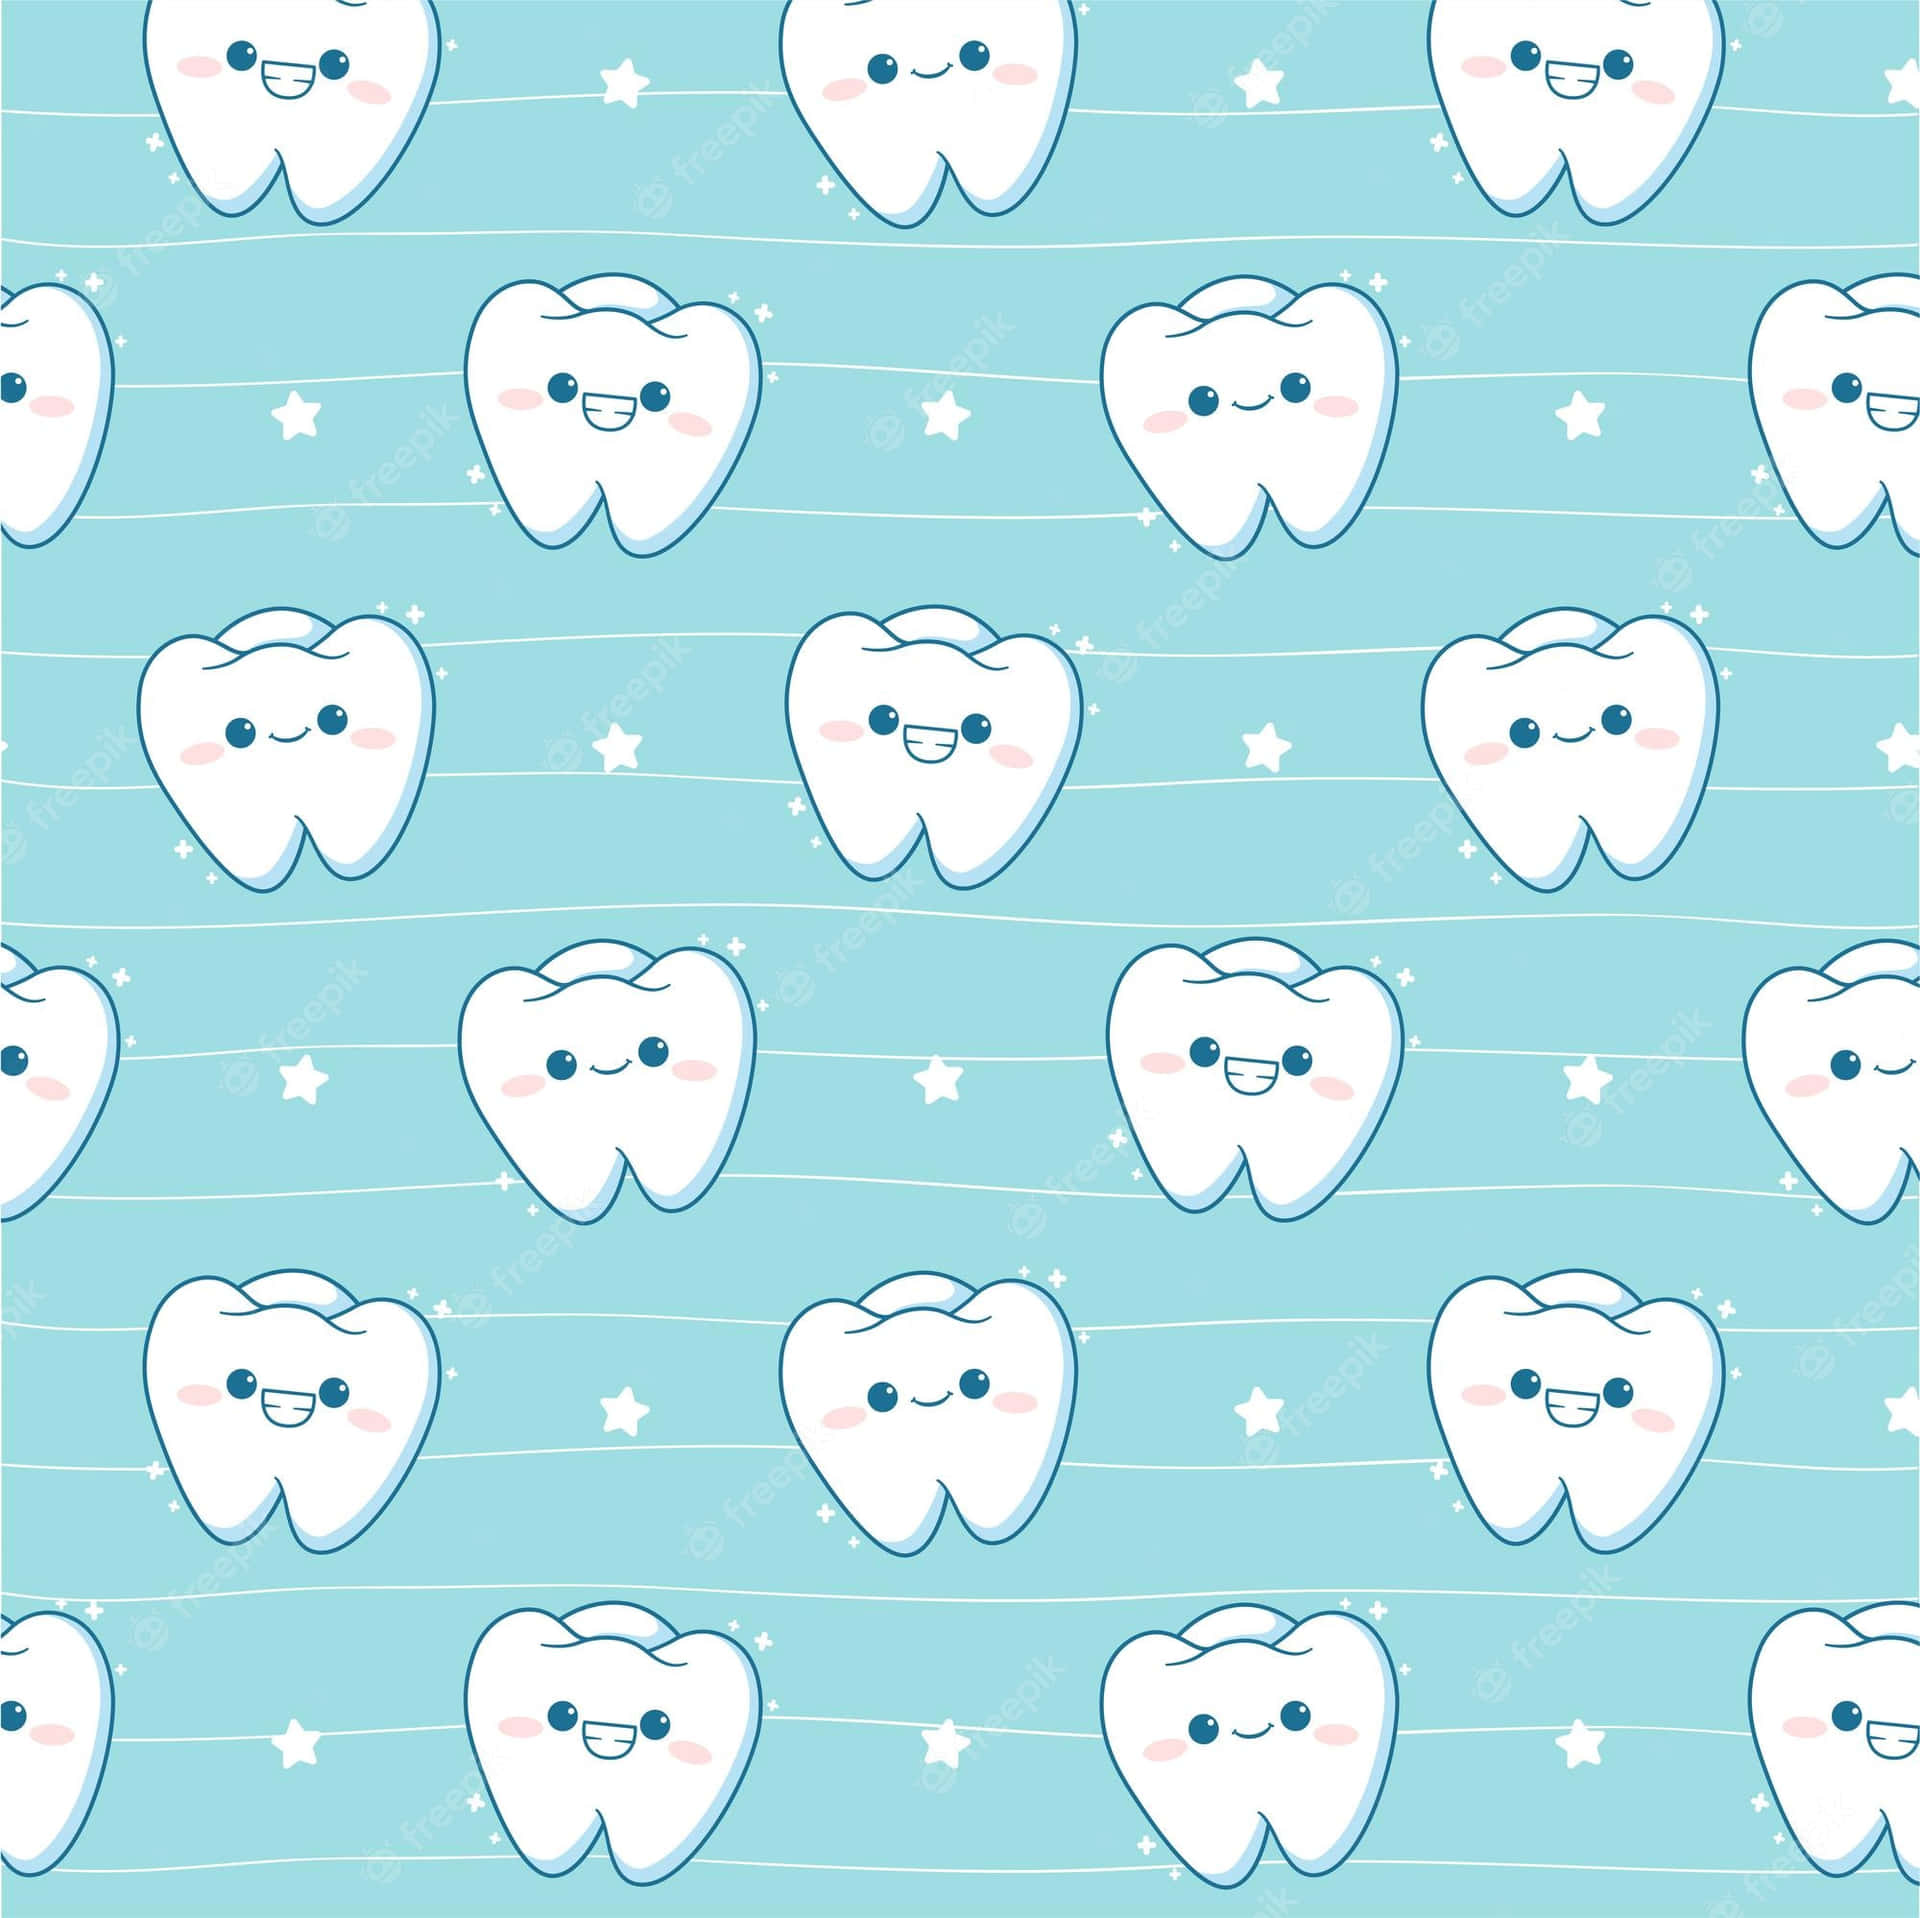 Brush and Floss Regularly to Keep Your Teeth Healthy